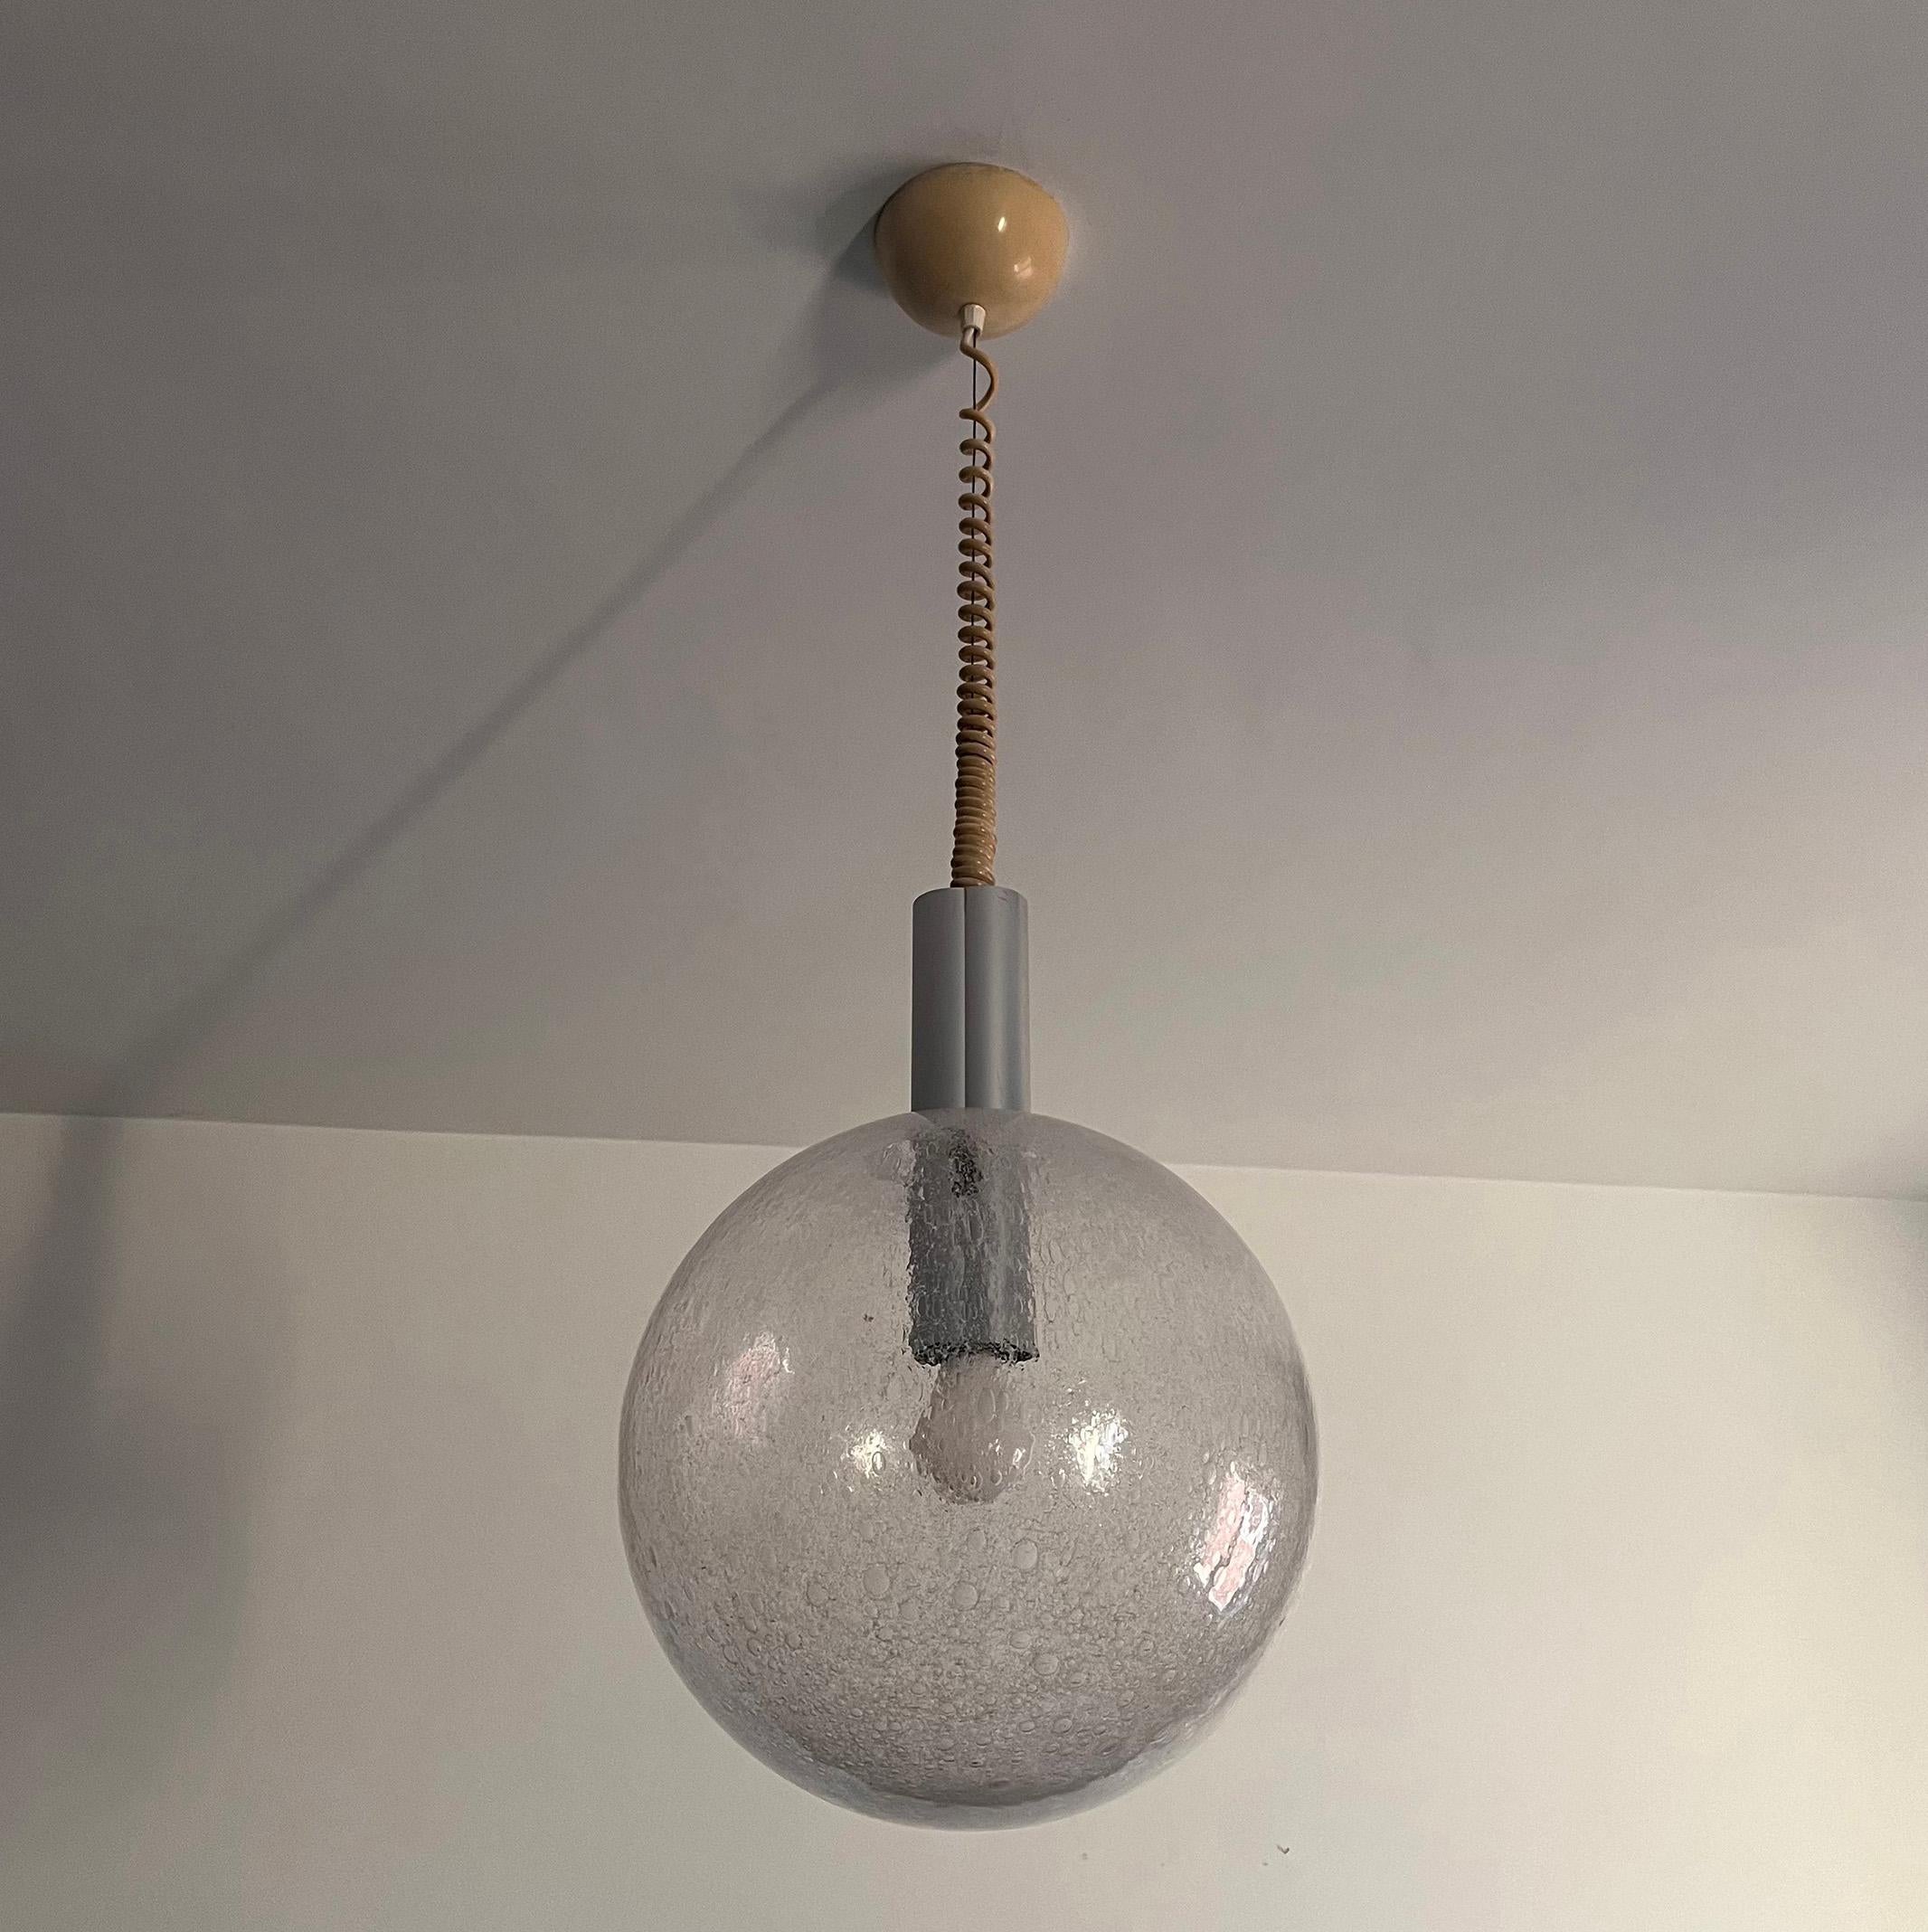 Afra & Tobia Scarpa (1935-2011 & 1935-)

« Sfera »

An aluminum and blown glass pendant light, the spherical glass shade with metallized and frosted finish, with inclusion of metal particules and silica, with a cylindrical aluminum tube containing